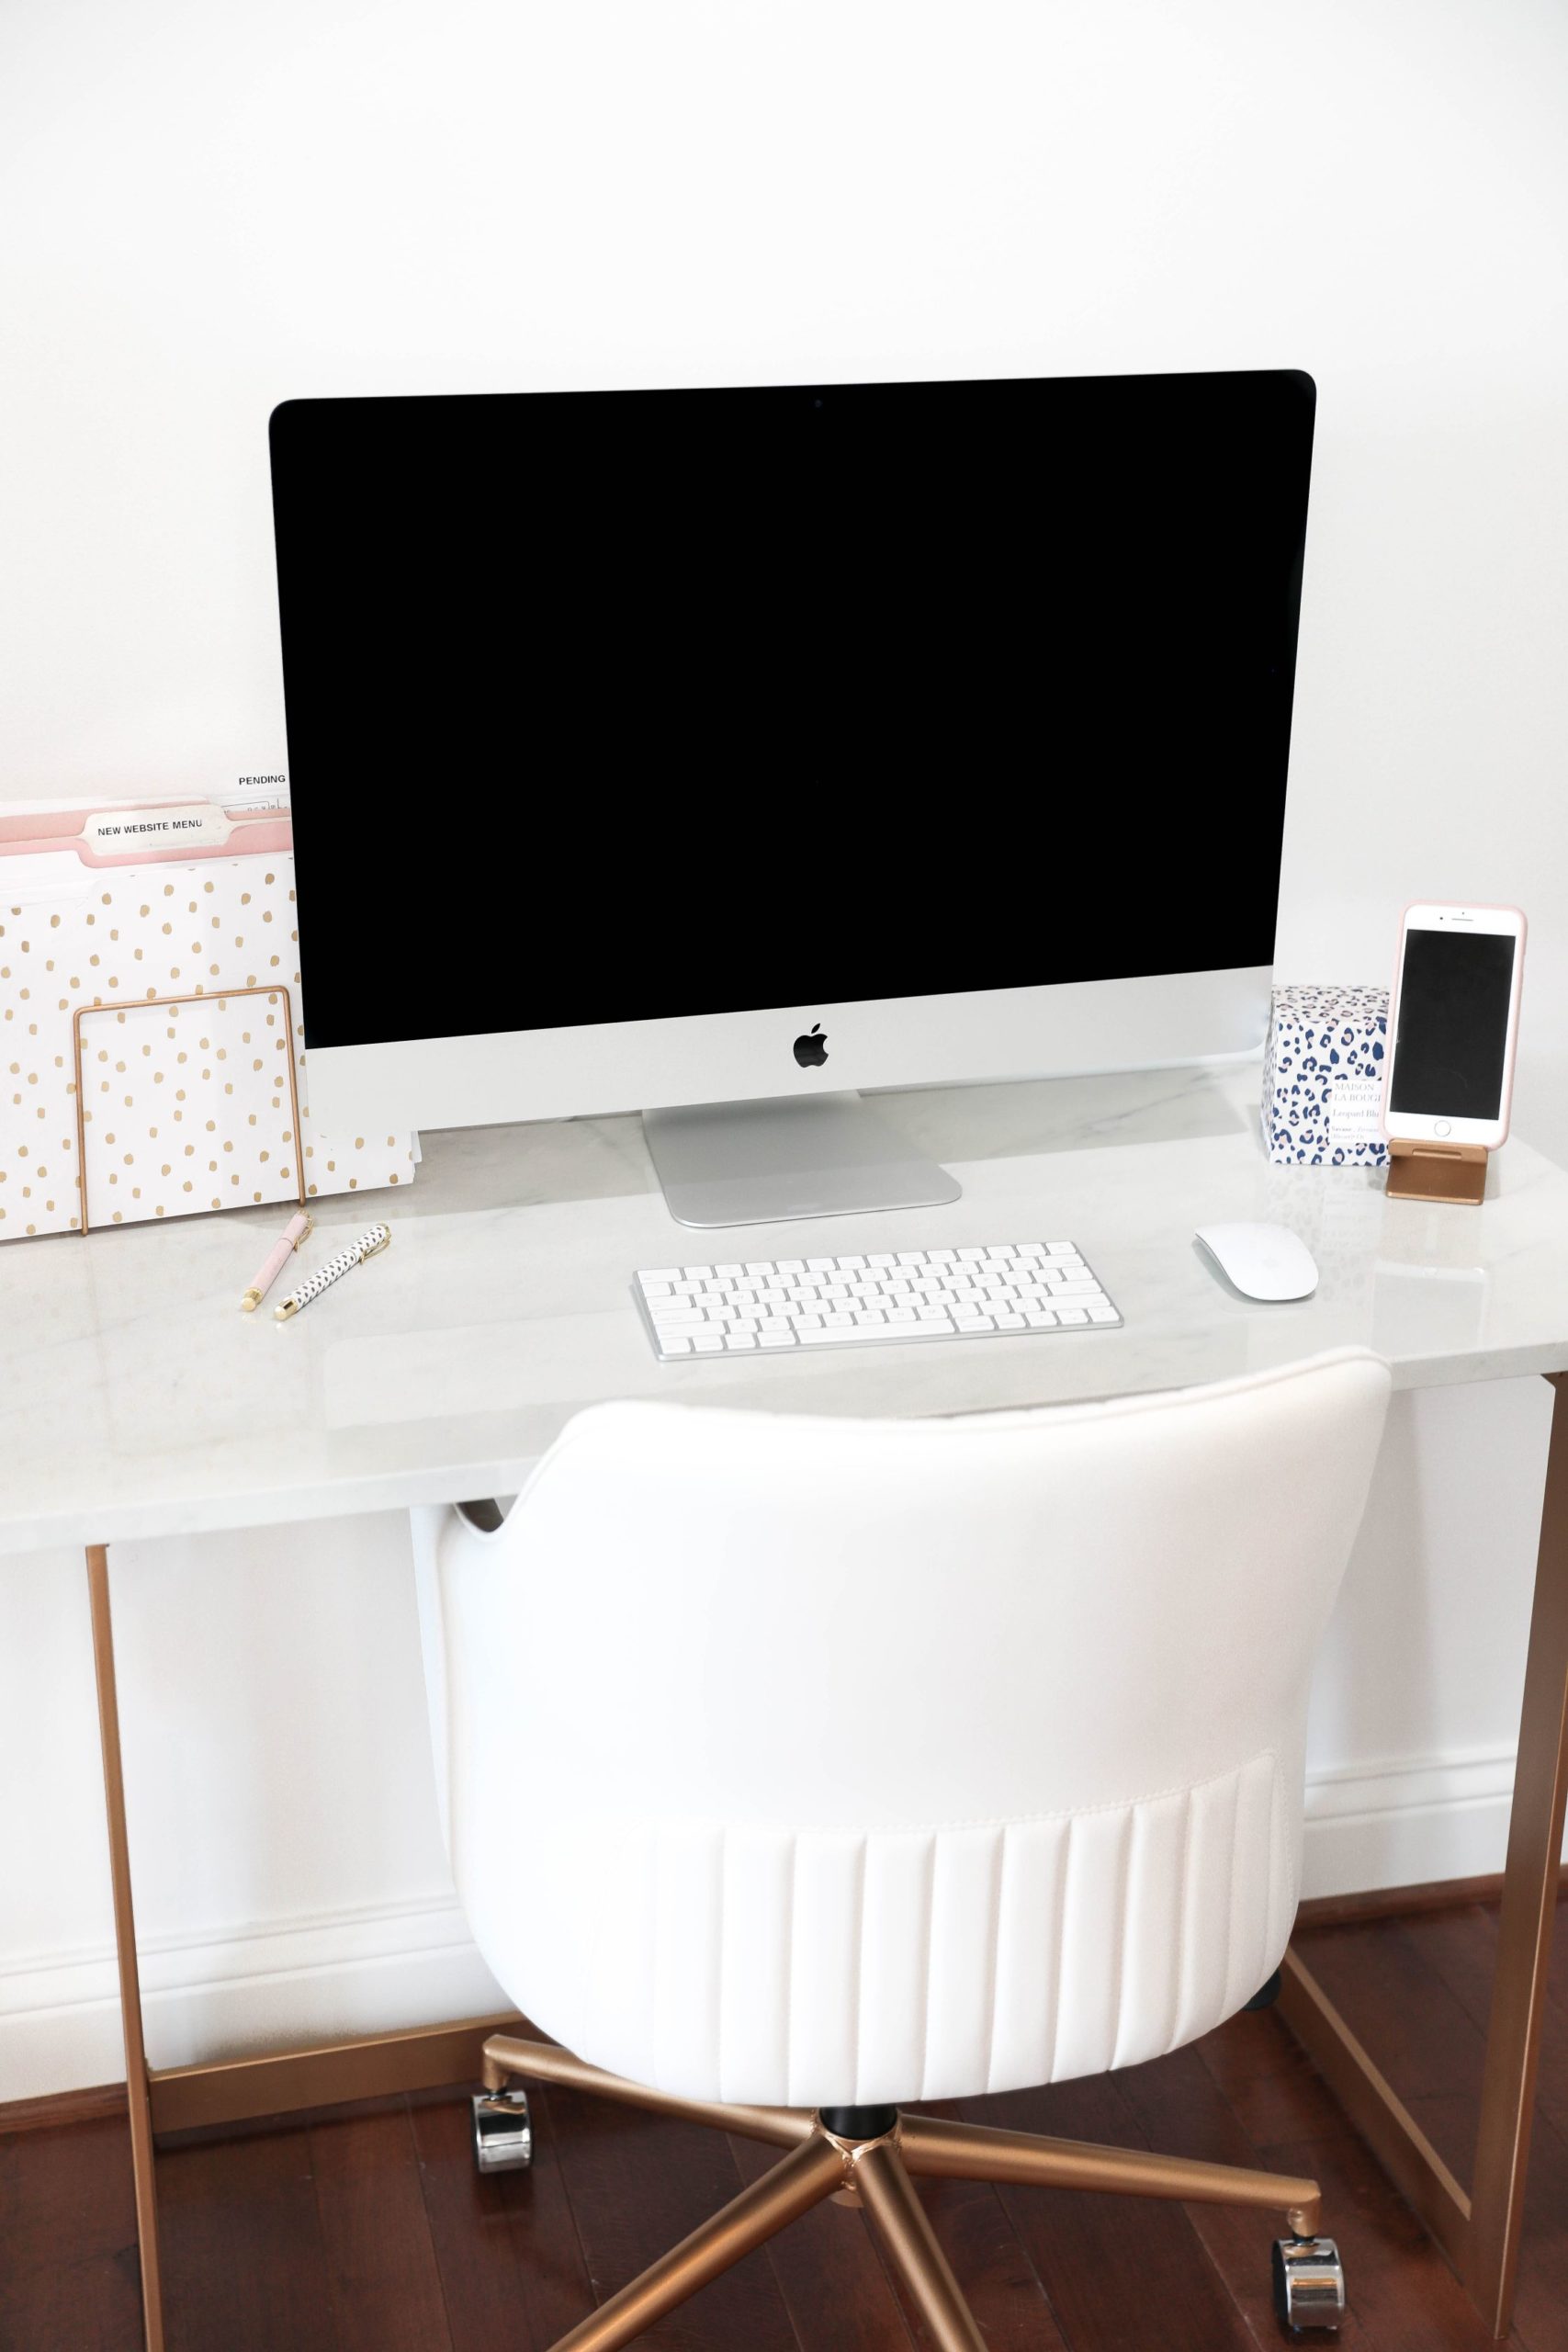 DESK GOALS! All the details on my "Marble and Gold Desk" plus all my office accessories! Details on daily dose of charm by Lauren Lindmark boutique owner of Inspired Boutique